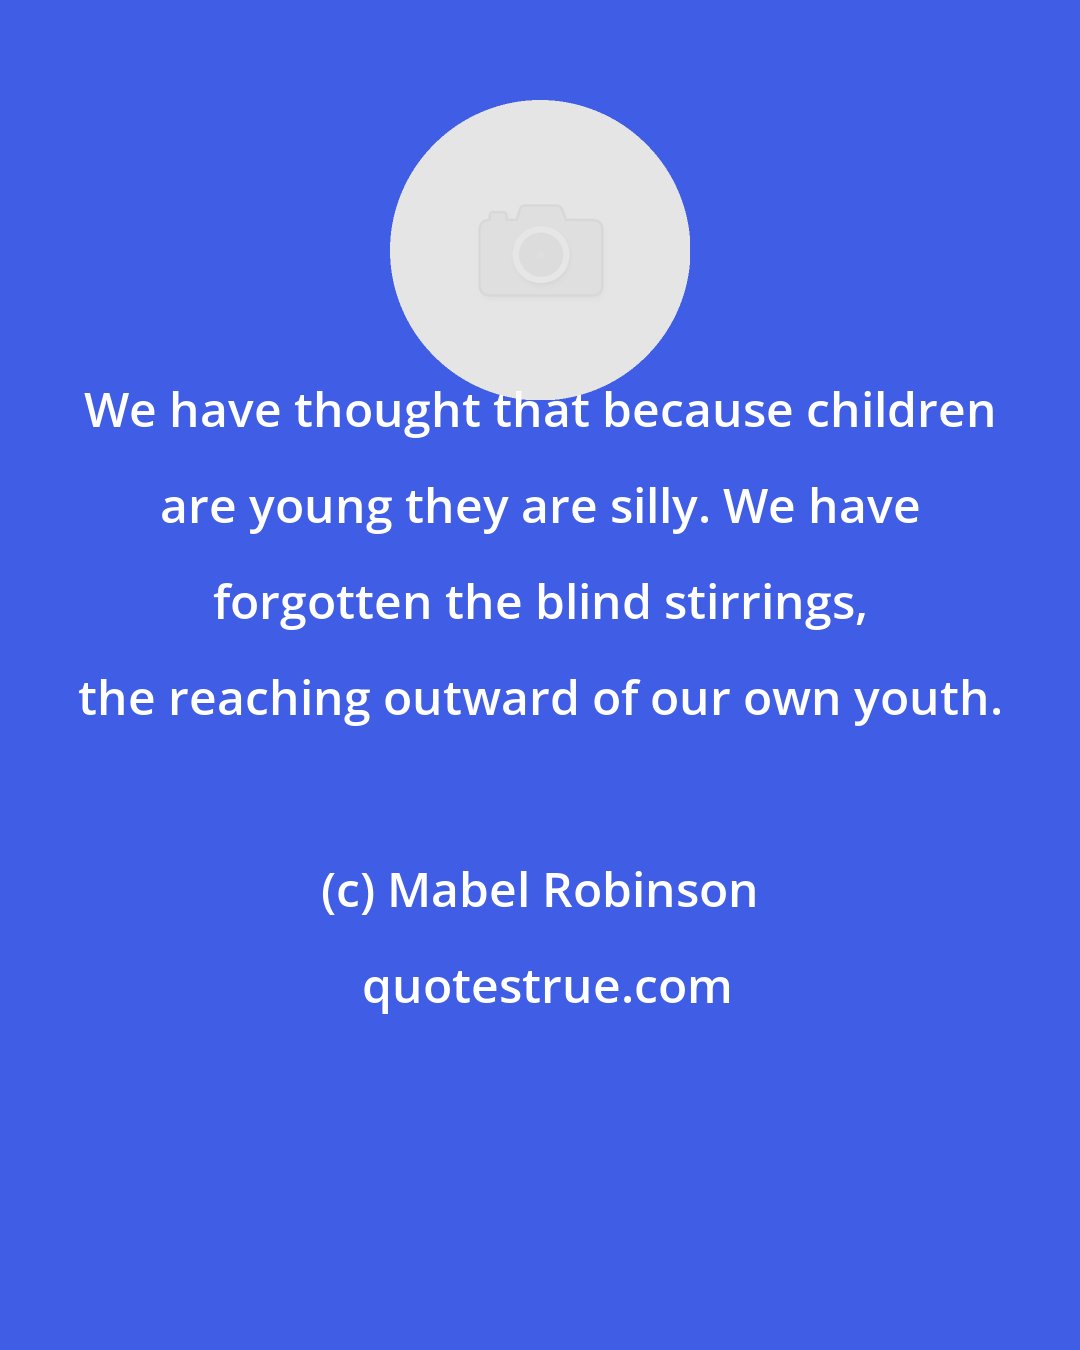 Mabel Robinson: We have thought that because children are young they are silly. We have forgotten the blind stirrings, the reaching outward of our own youth.